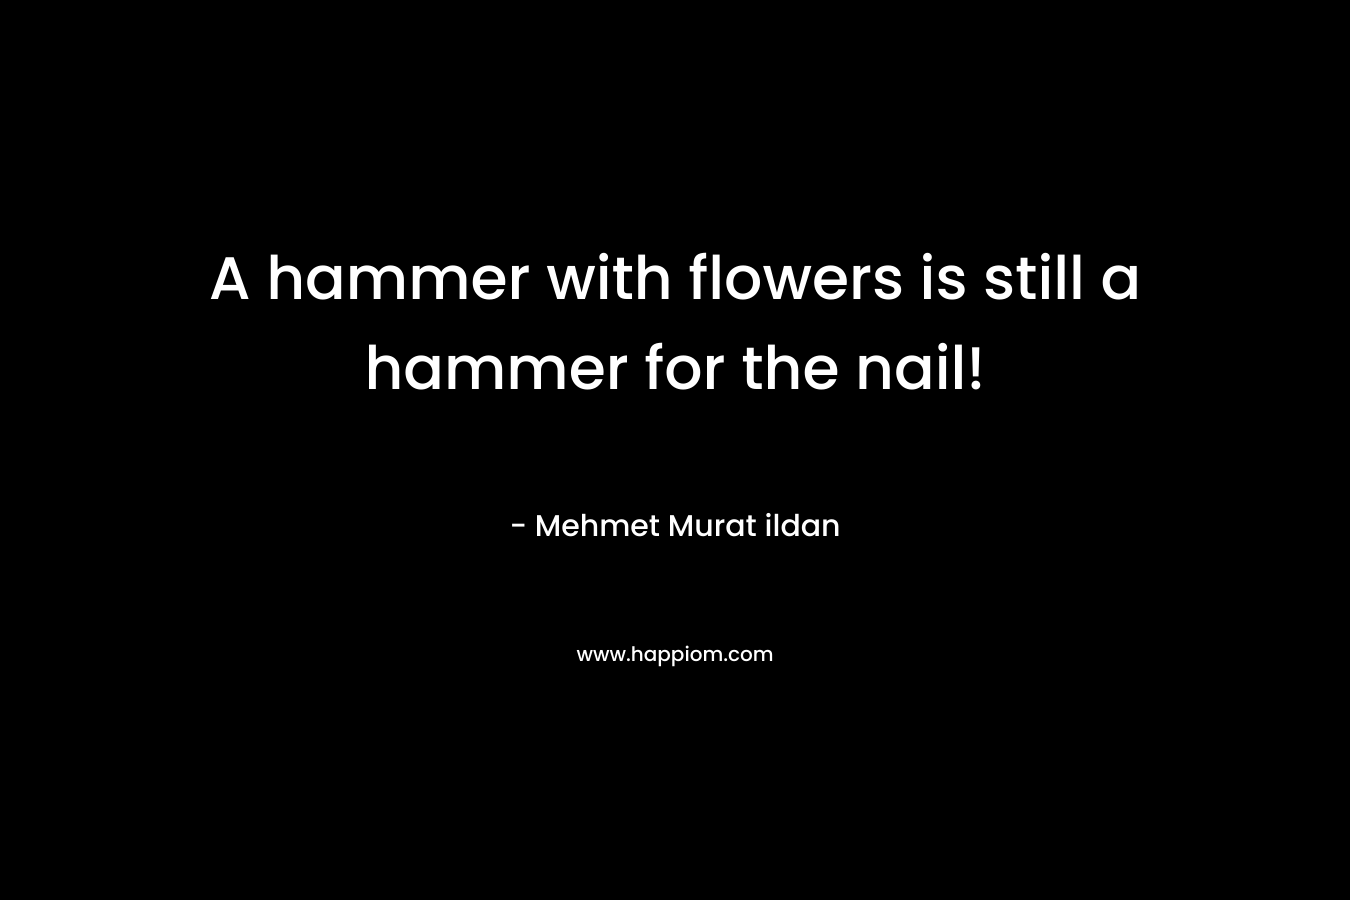 A hammer with flowers is still a hammer for the nail!